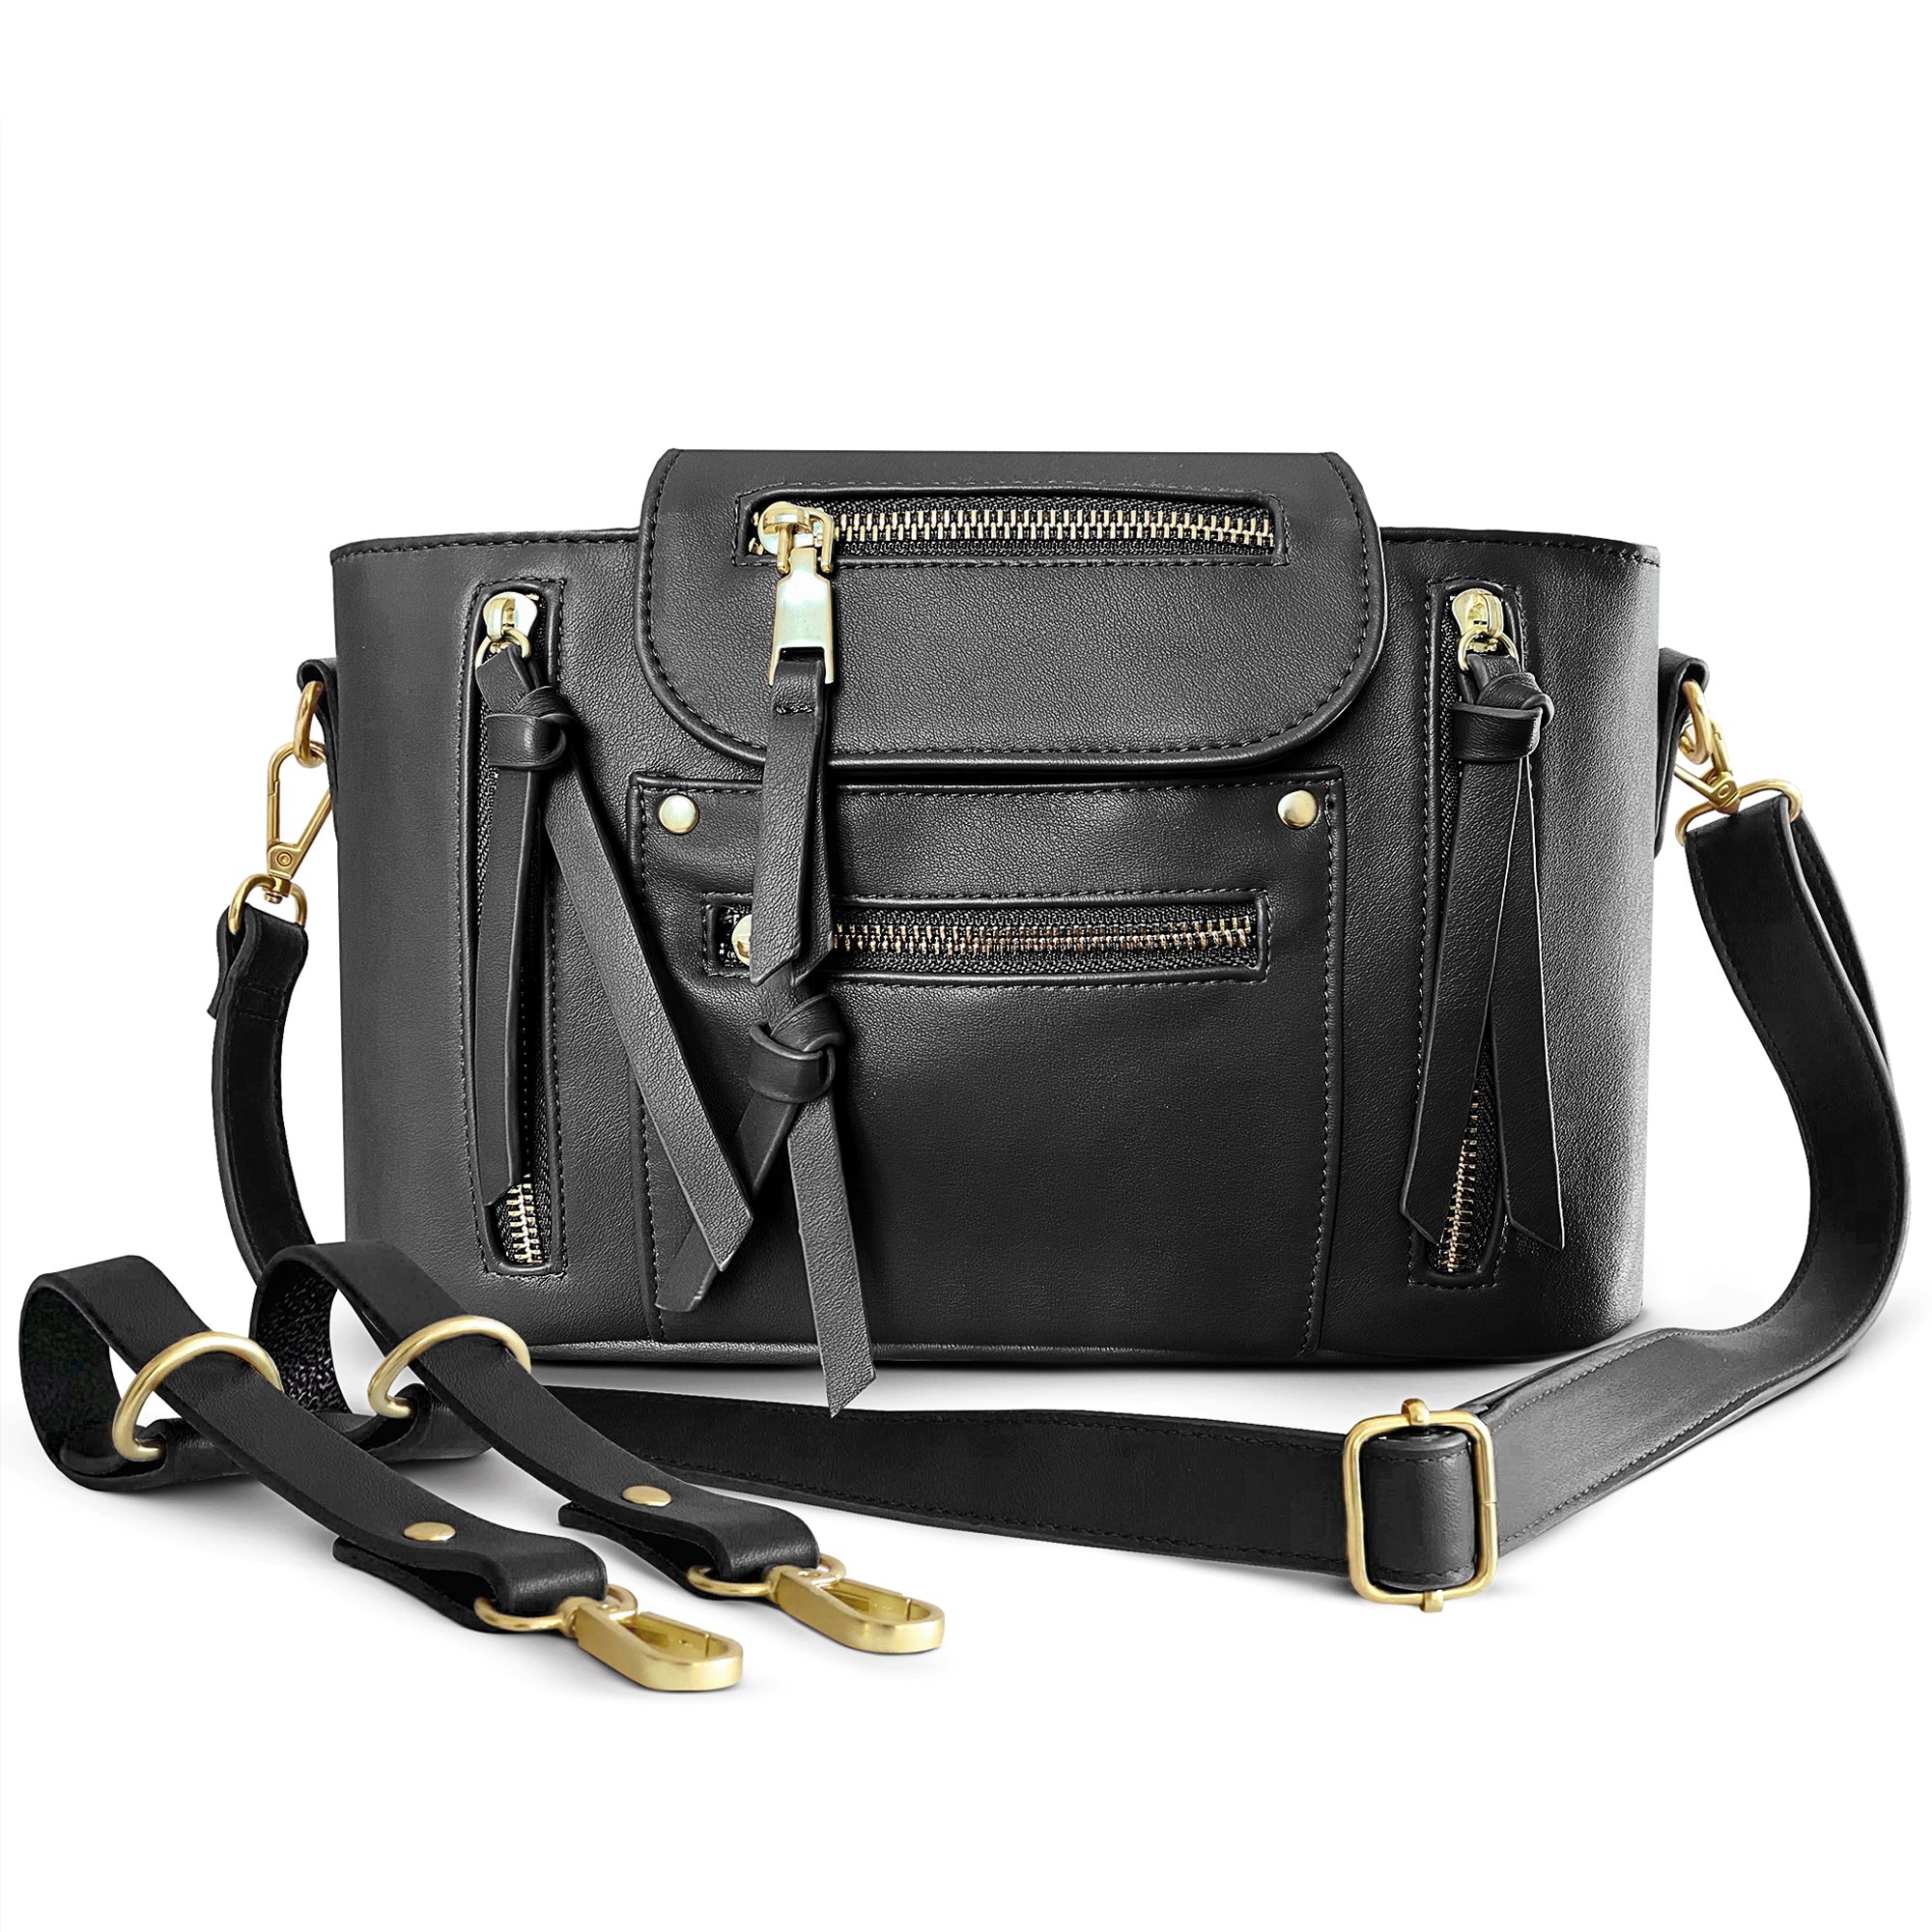 Buy HUGGI PU leather hand bag for women | shoulder bags for women with  strap & zipper | ladies purse for birthday, anniversary, thanks giving |  purse and handbag combo (Black) at Amazon.in